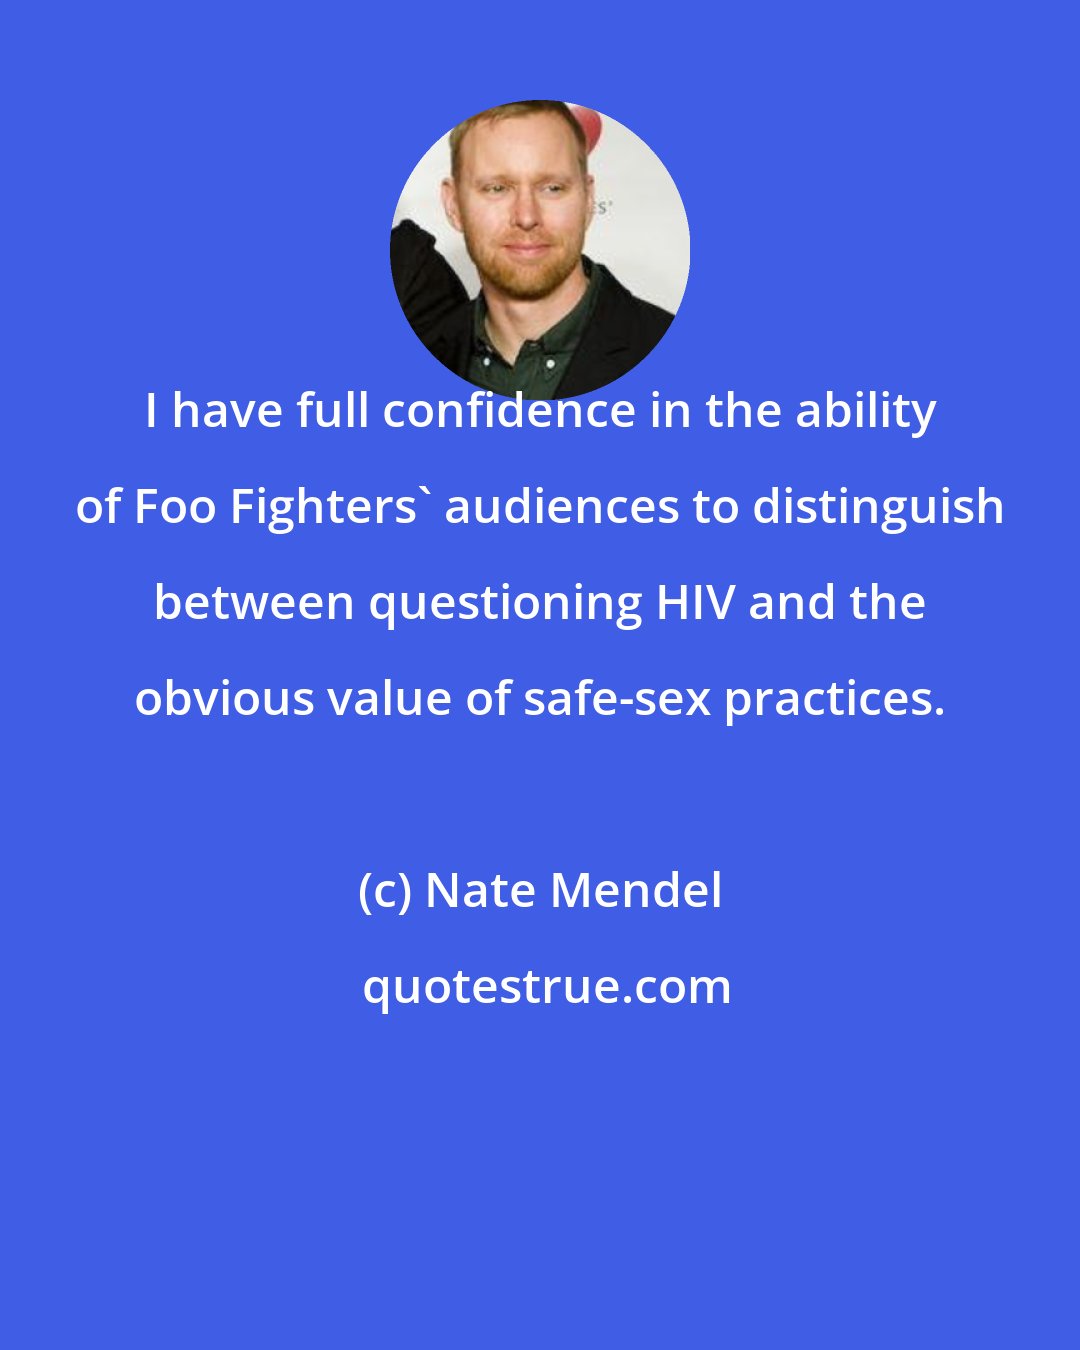 Nate Mendel: I have full confidence in the ability of Foo Fighters' audiences to distinguish between questioning HIV and the obvious value of safe-sex practices.